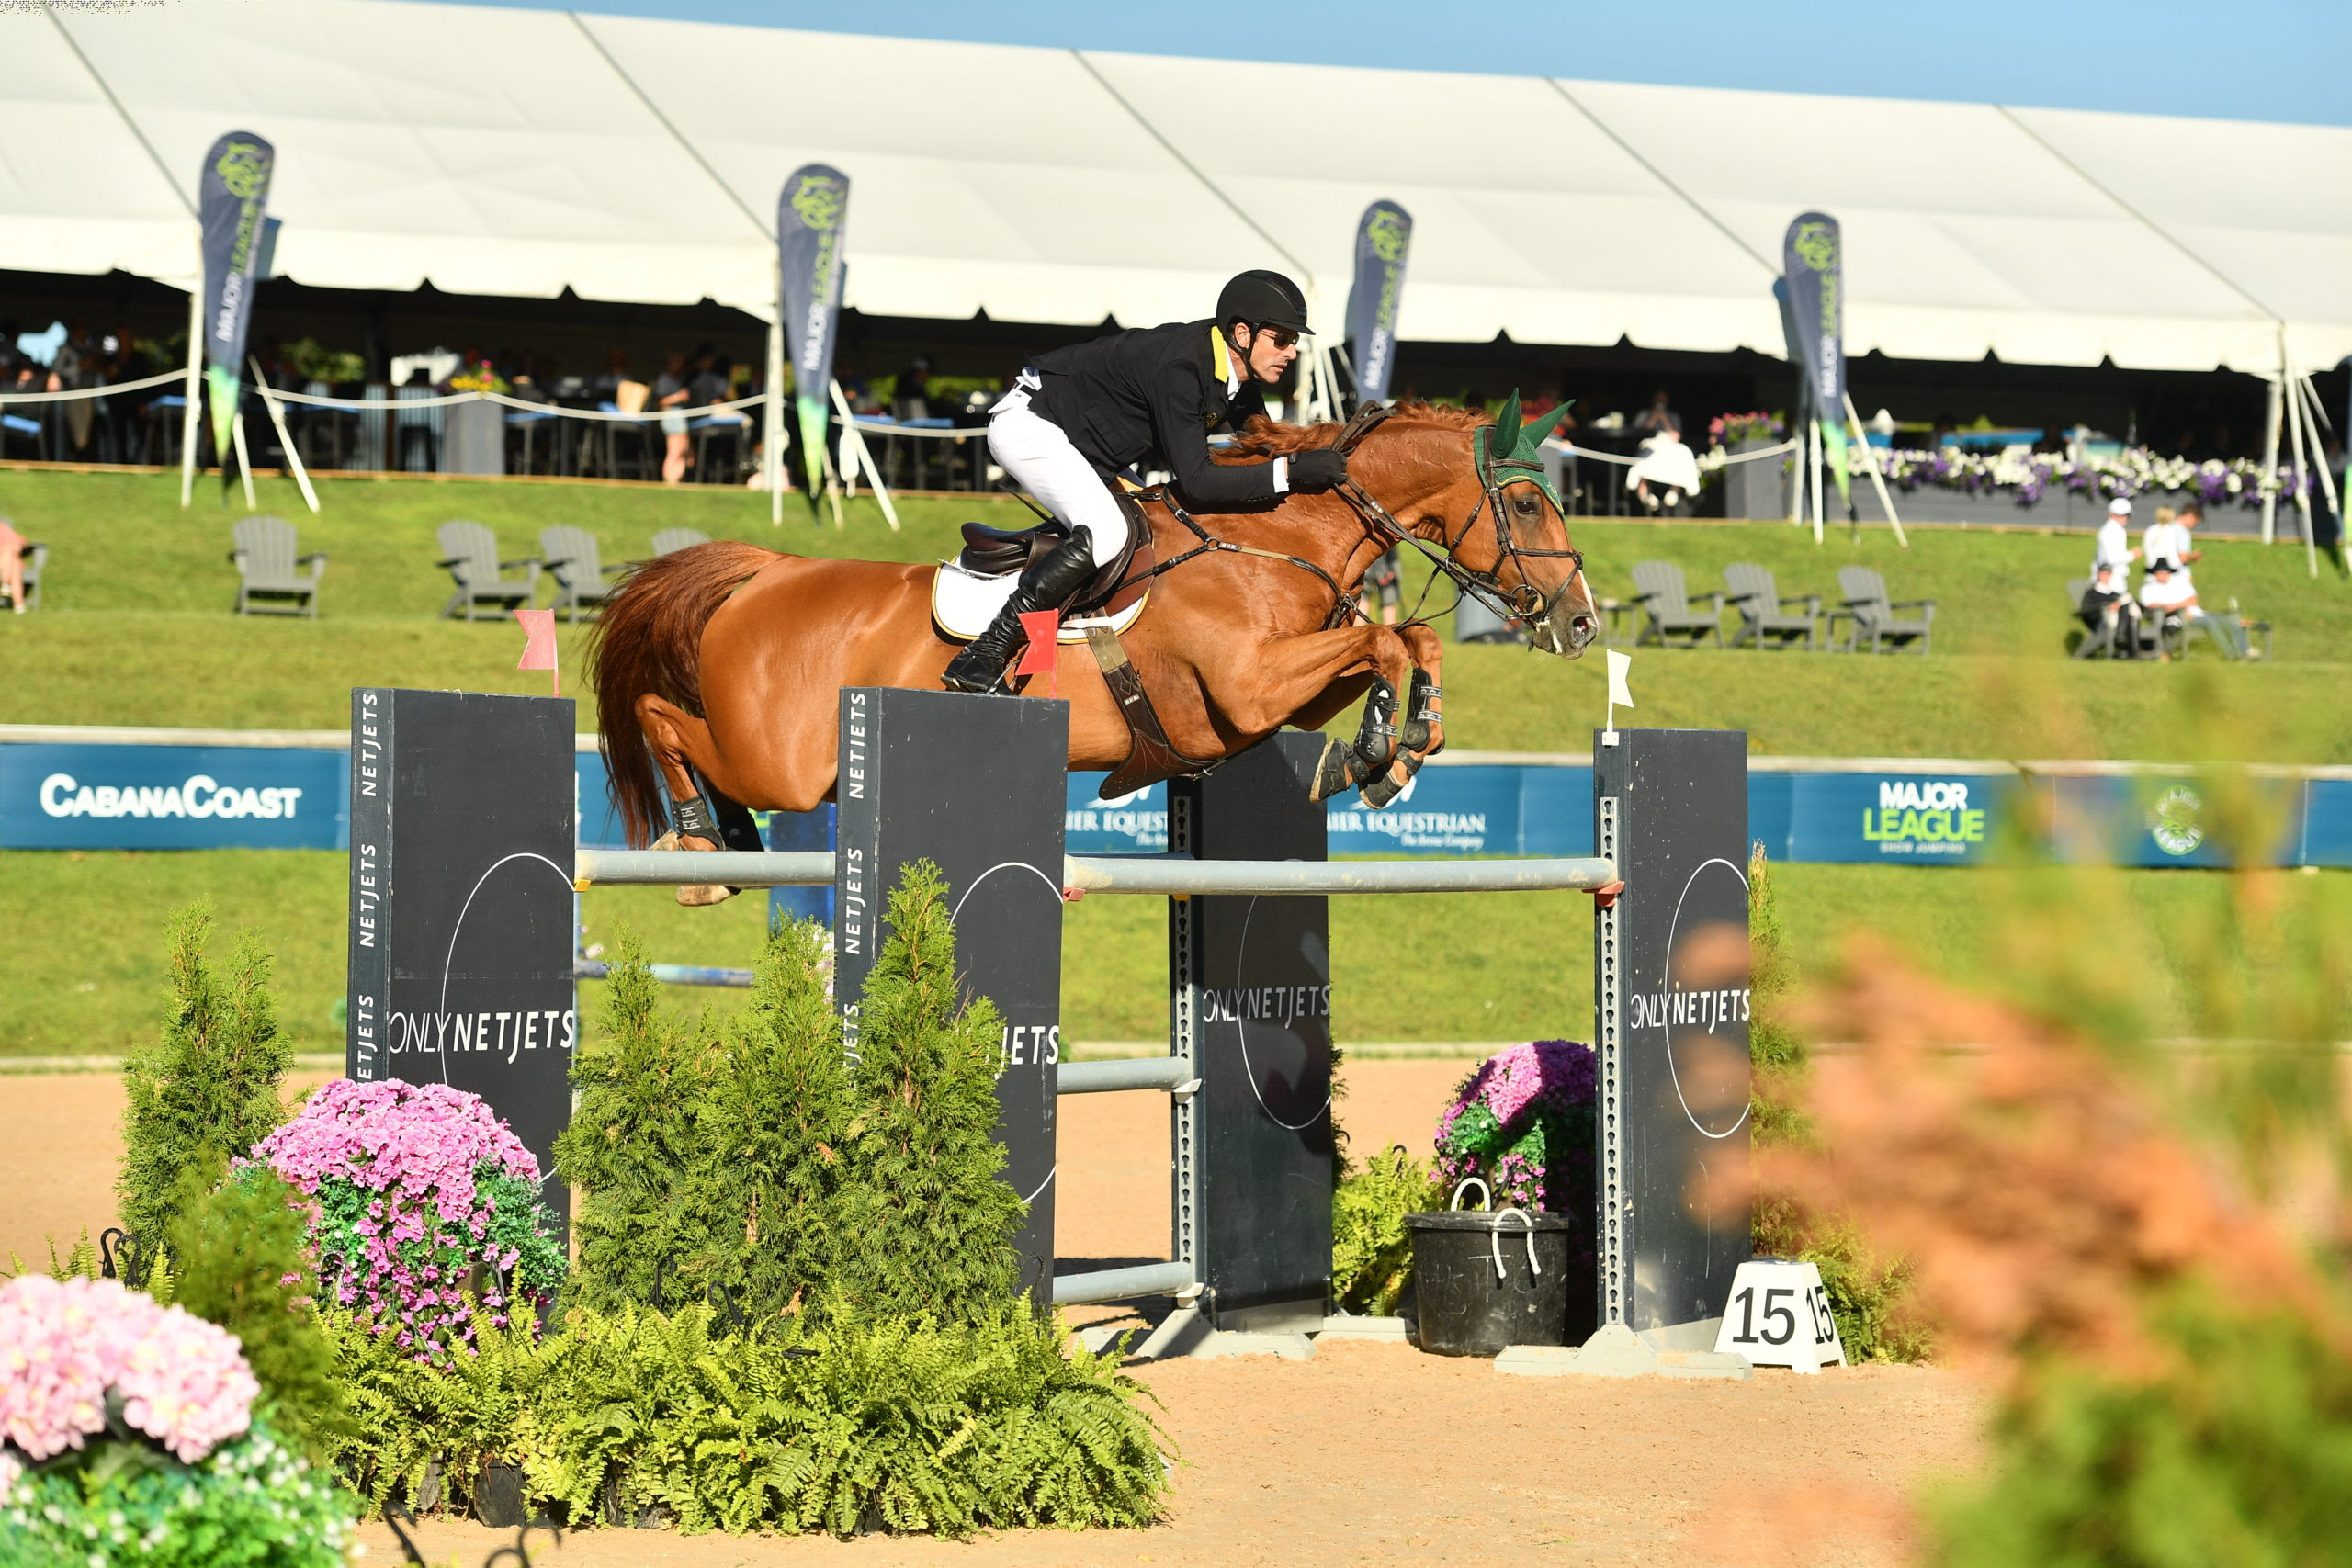 Rowan Willis and Blue Movie Set the Scene at Major League Show Jumping